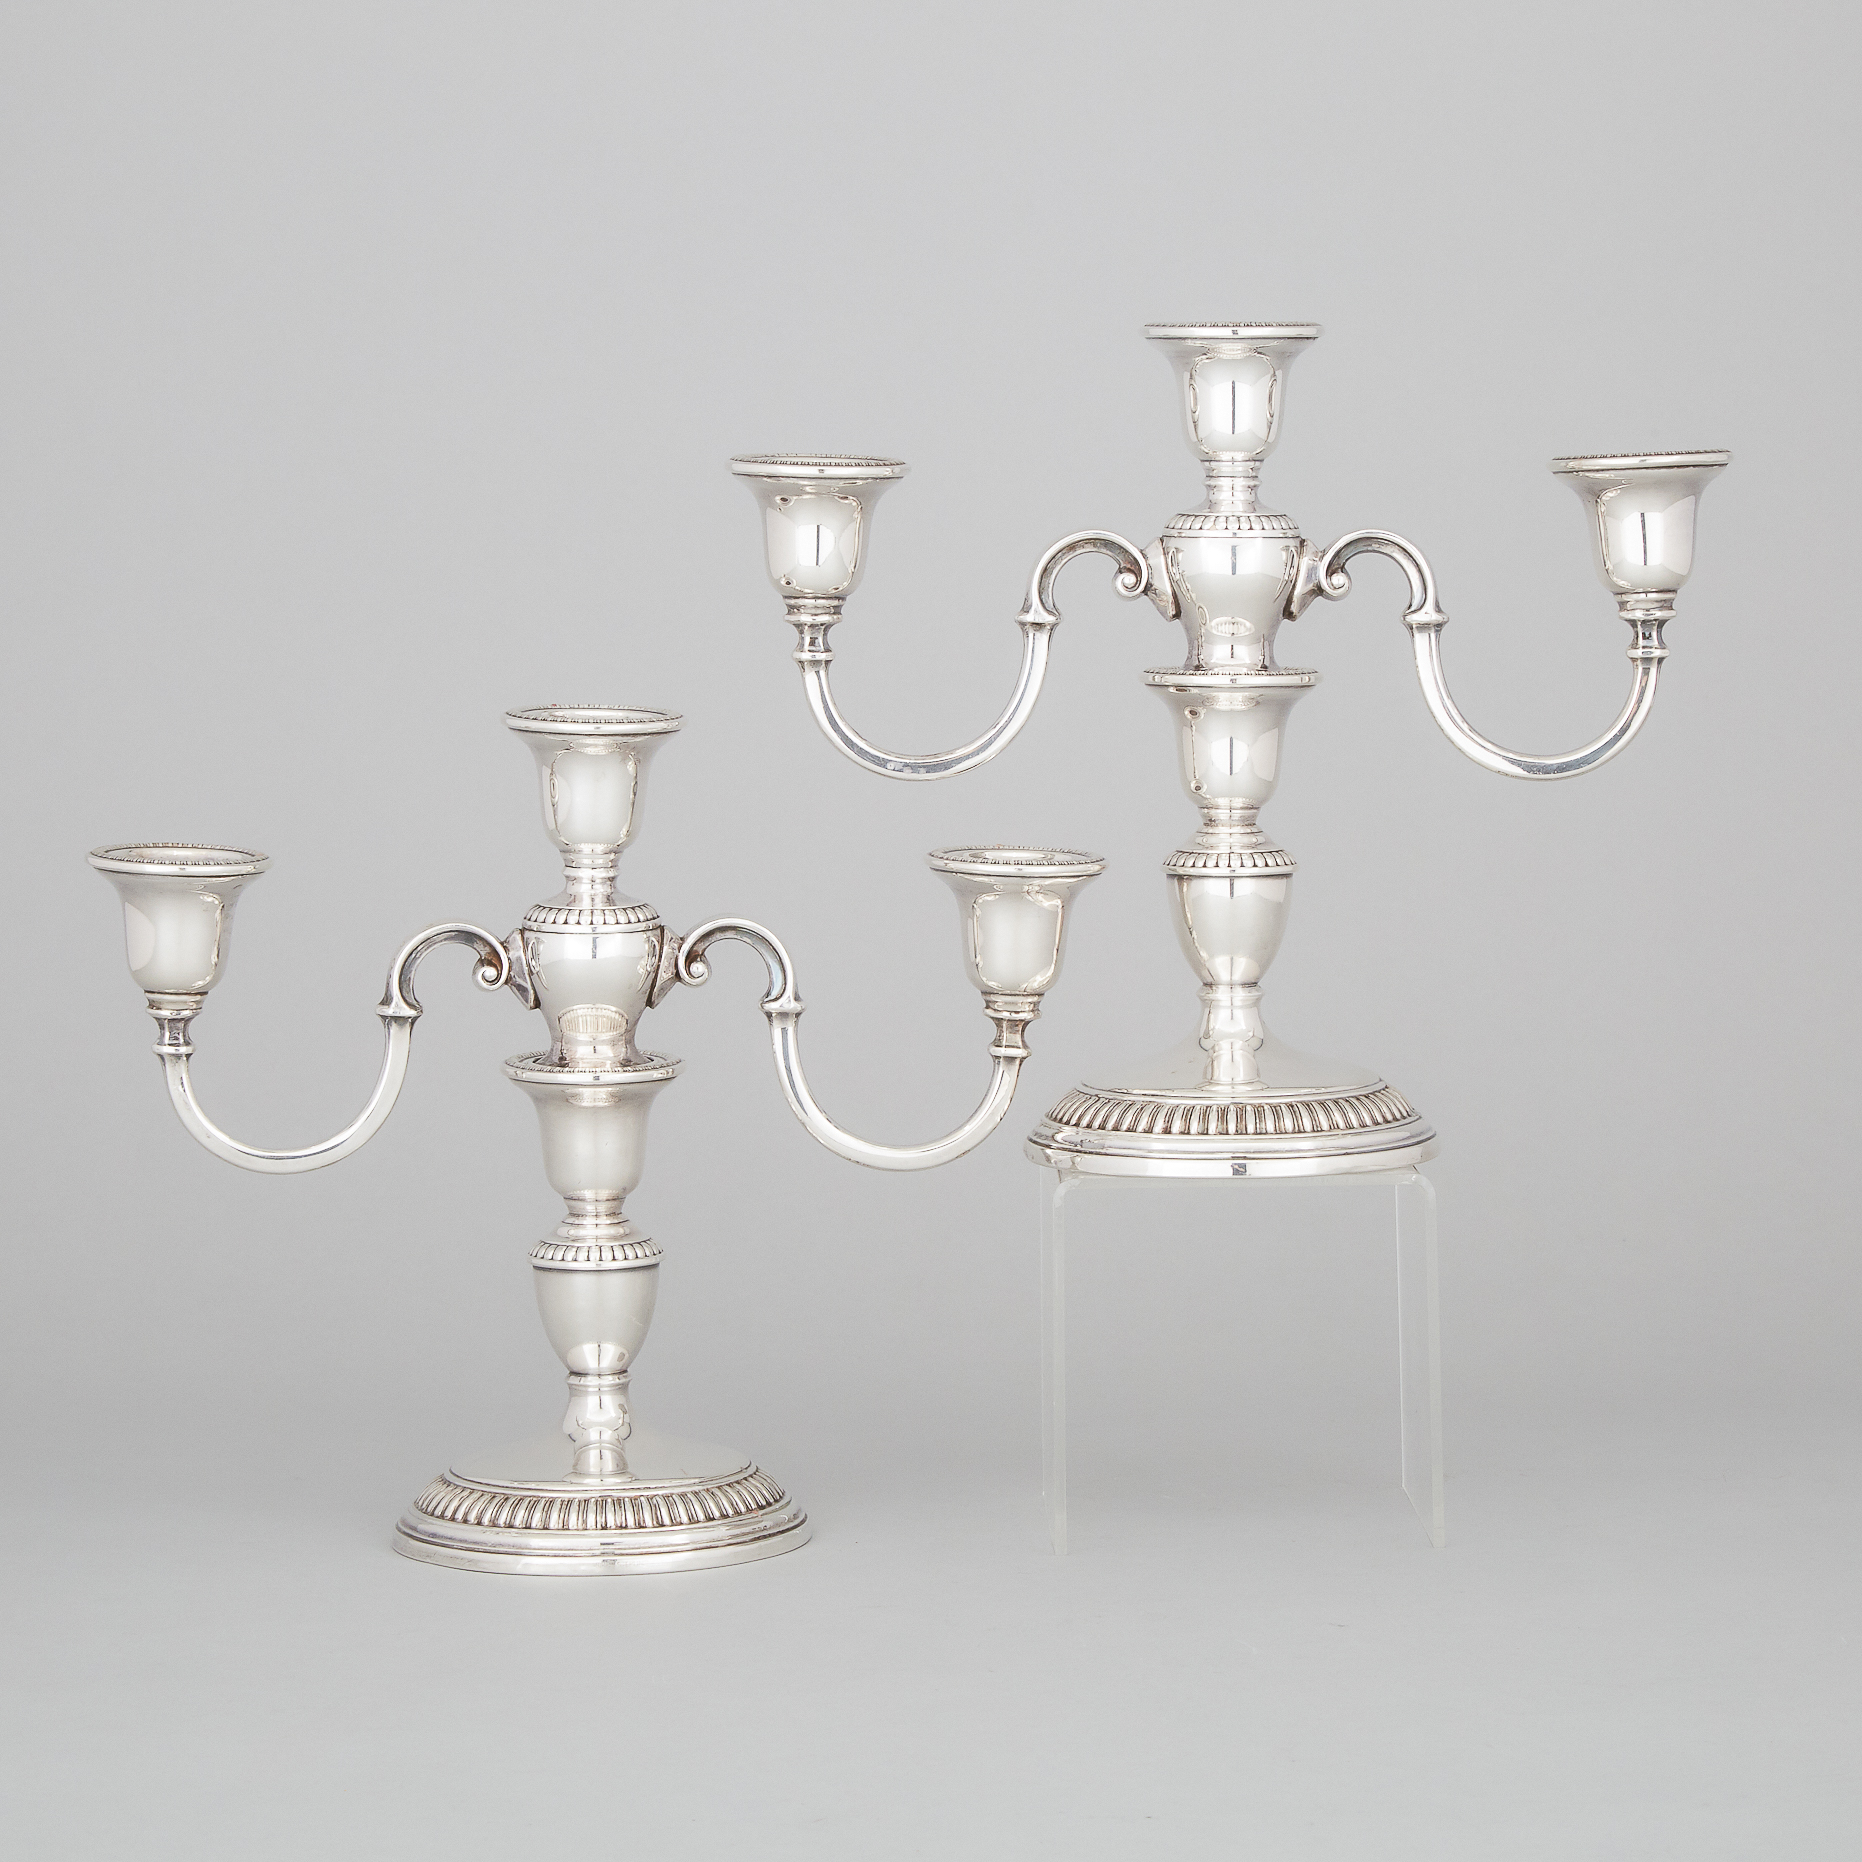 Pair of Canadian Silver Three-Light Candelabra, Henry Birks & Sons, Montreal, Que., 1971